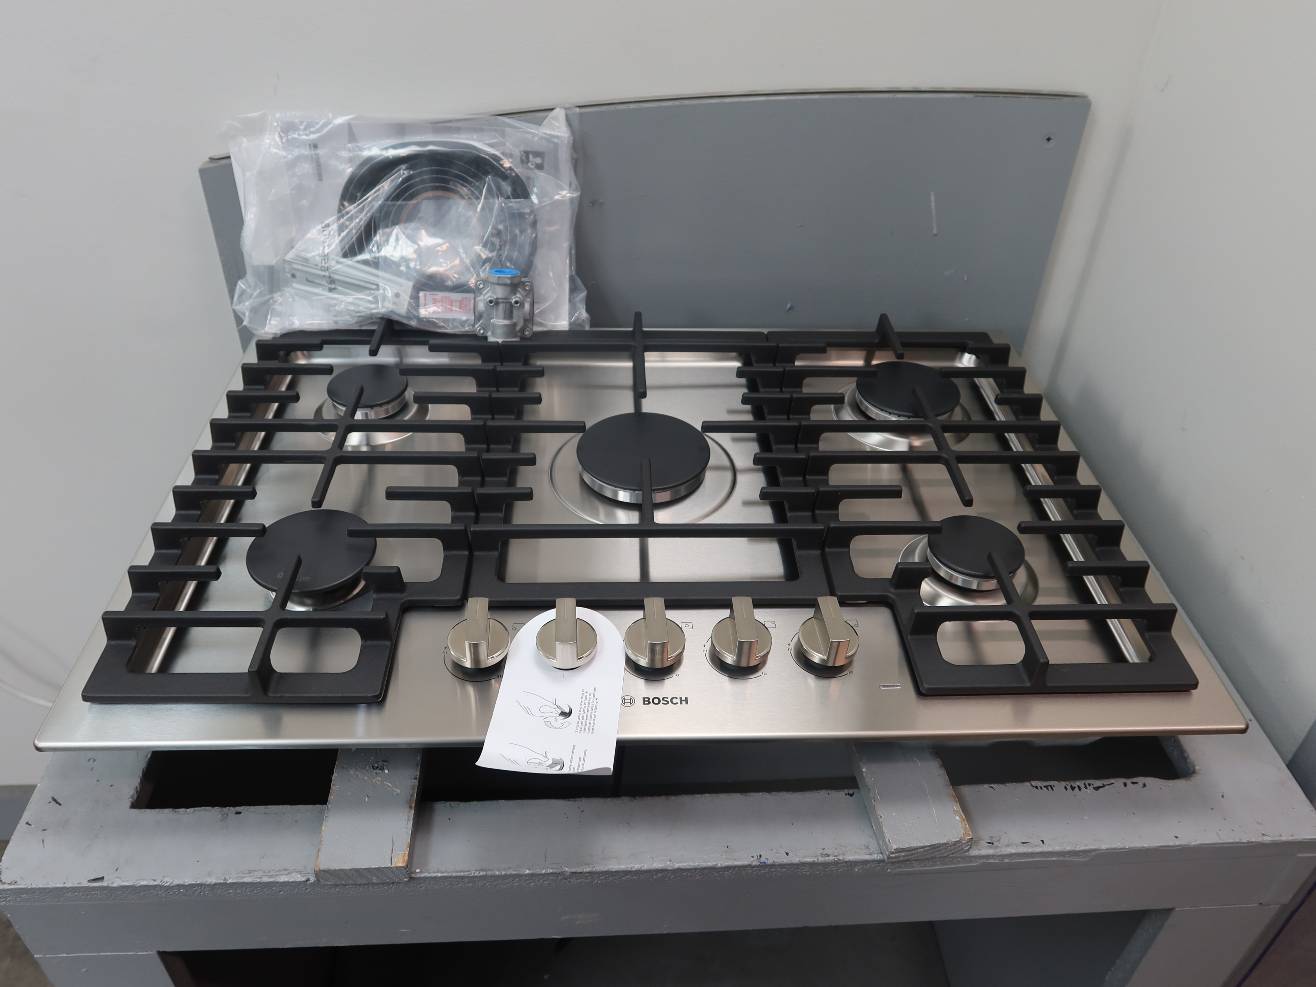 Bosch 500 Series Stainless 30" OptiSim 5 Sealed Burners Gas Cooktop NGM5058UC